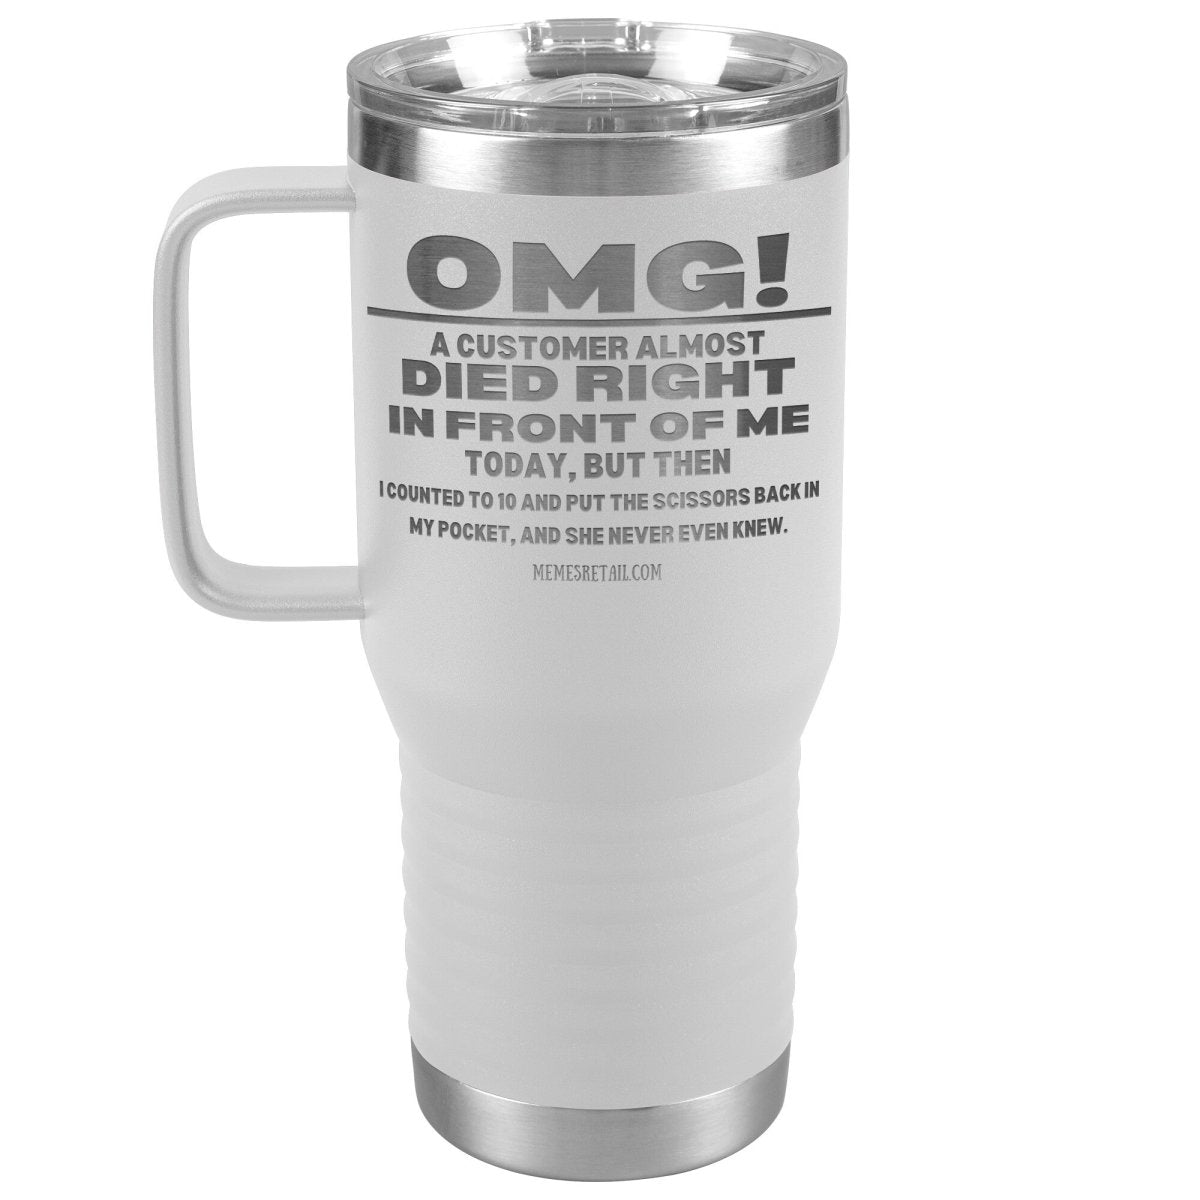 OMG! A Customer Almost Died Right In Front Of Me Tumbler, 20oz Travel Tumbler / White - MemesRetail.com